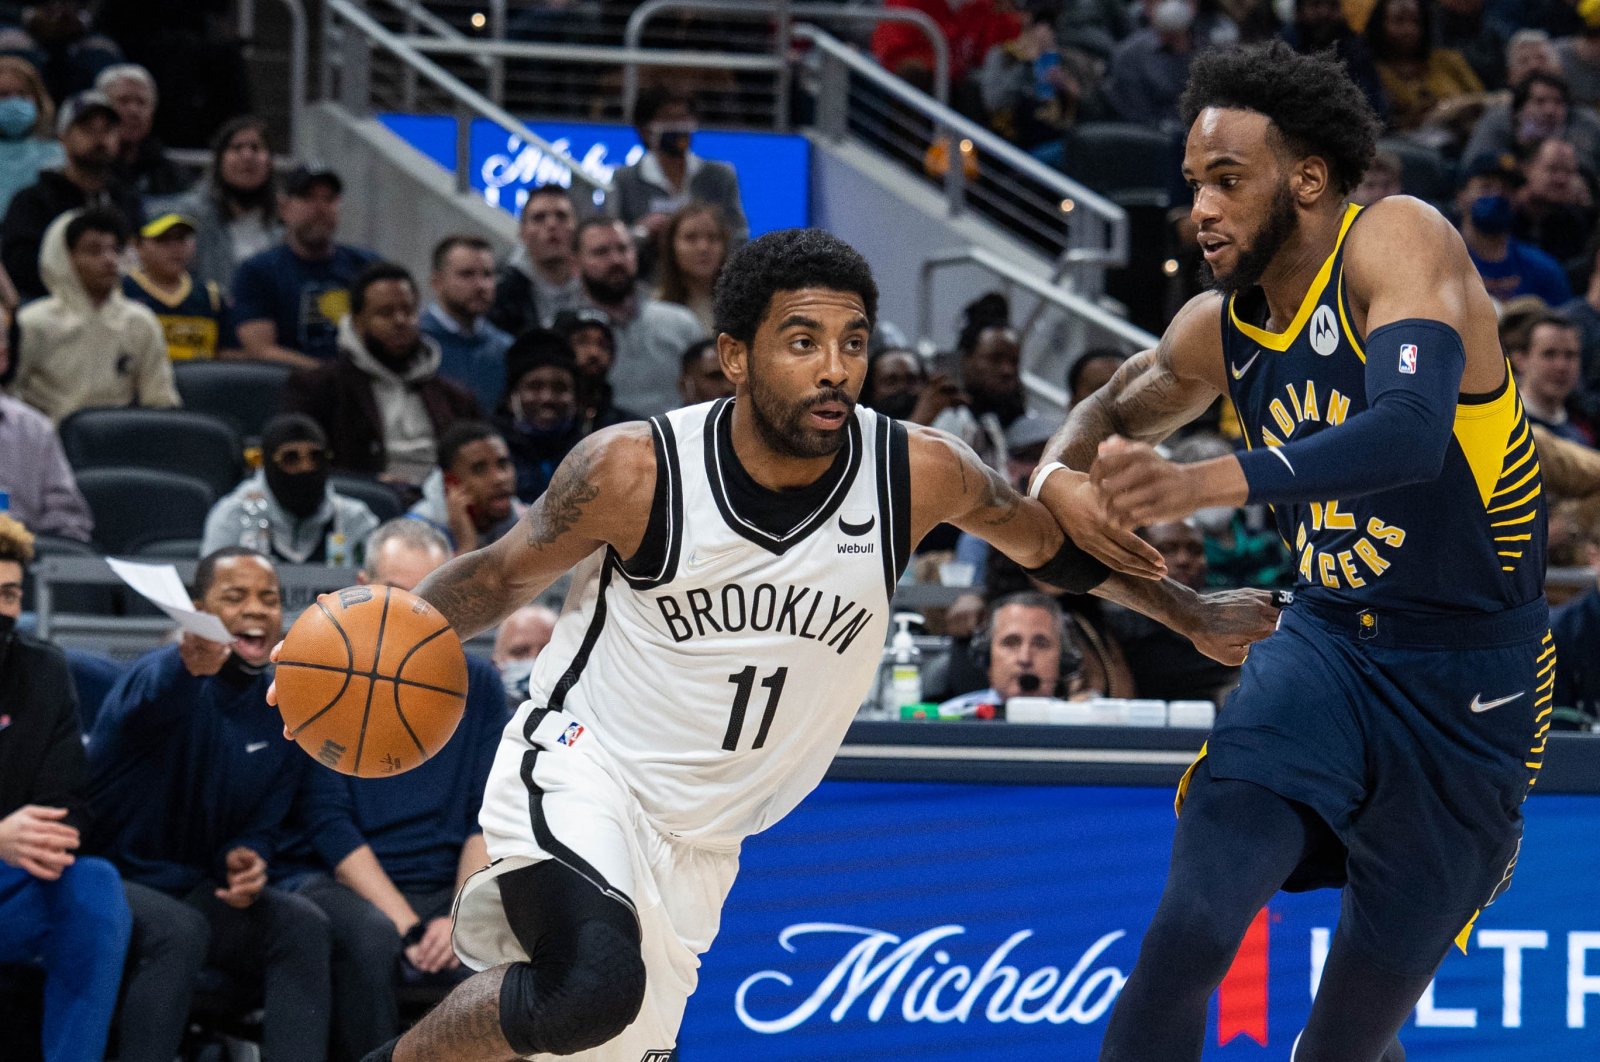 Brooklyn Nets Kyrie Irving (L) dribbles past Indiana Pacers Oshae Brissett in an NBA game in Indiana, U.S., Jan 5, 2022. (Reuters Photo)